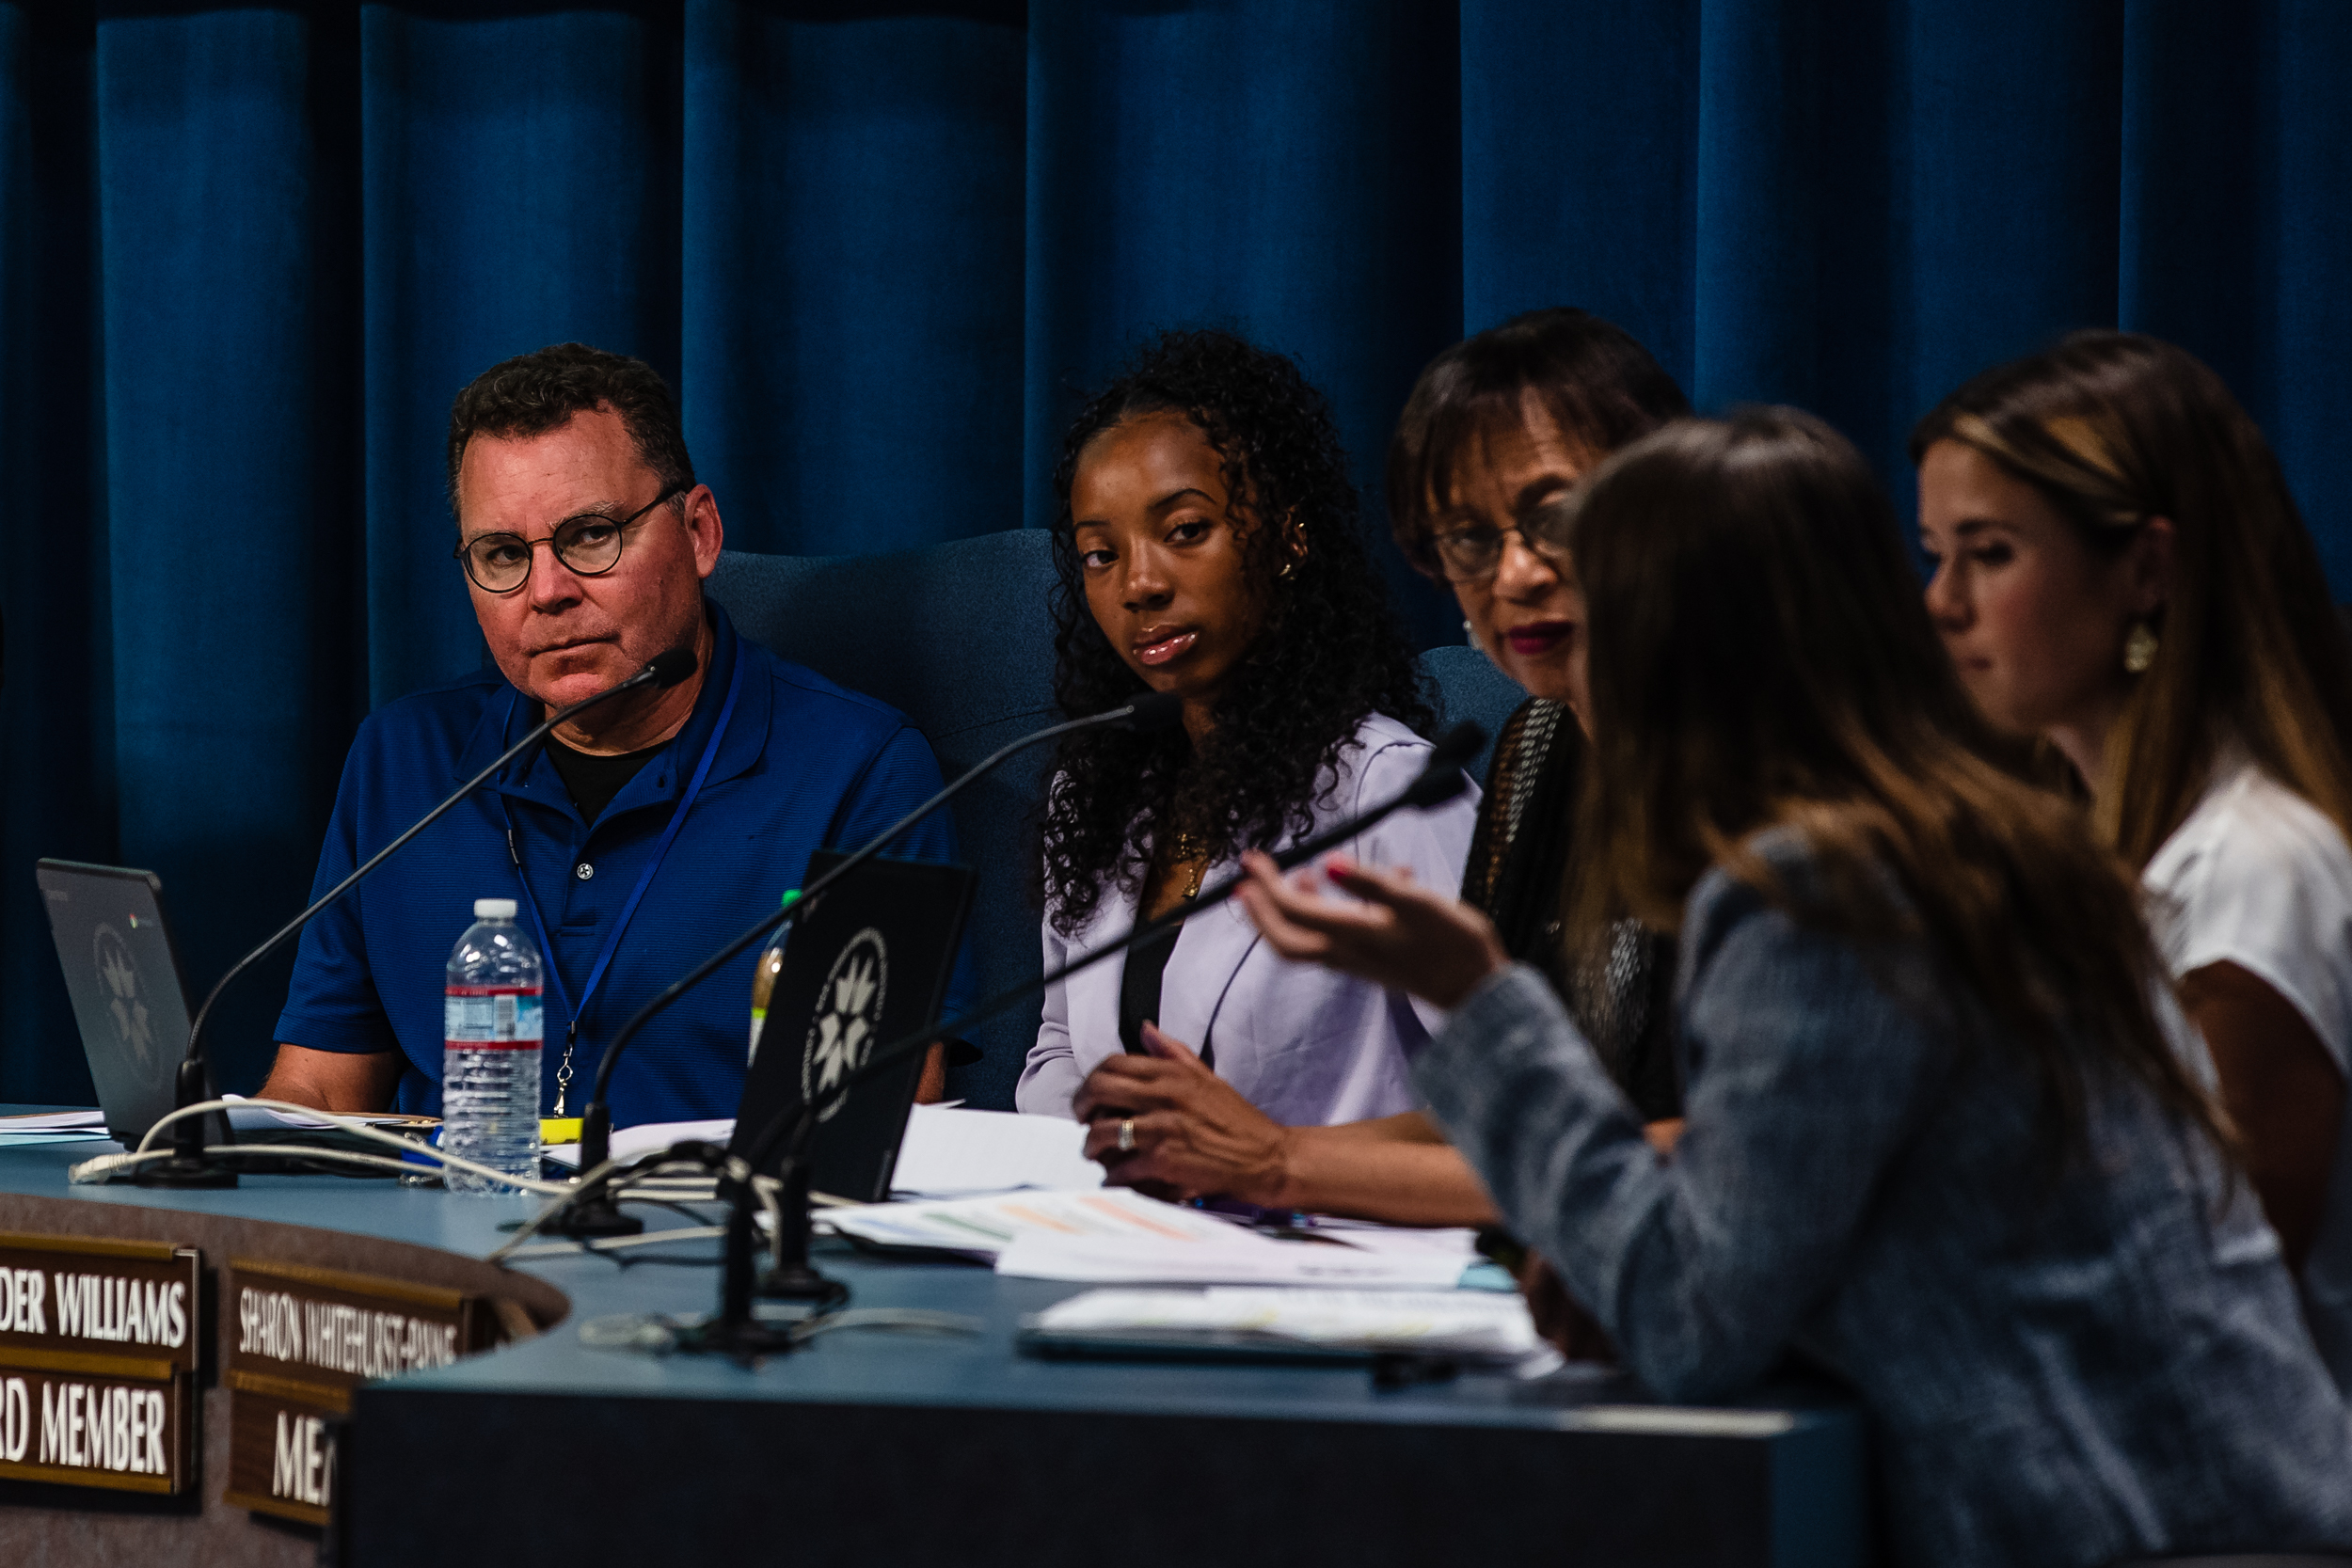 (From left to right) Board Trustee Richard Barrera, Student Board Member Blessyn Lavender Williams and District E Board of Education Trustee Sharon Whitehurst-Payne during a San Diego Unified School District meeting in University Heights on July 11, 2023.